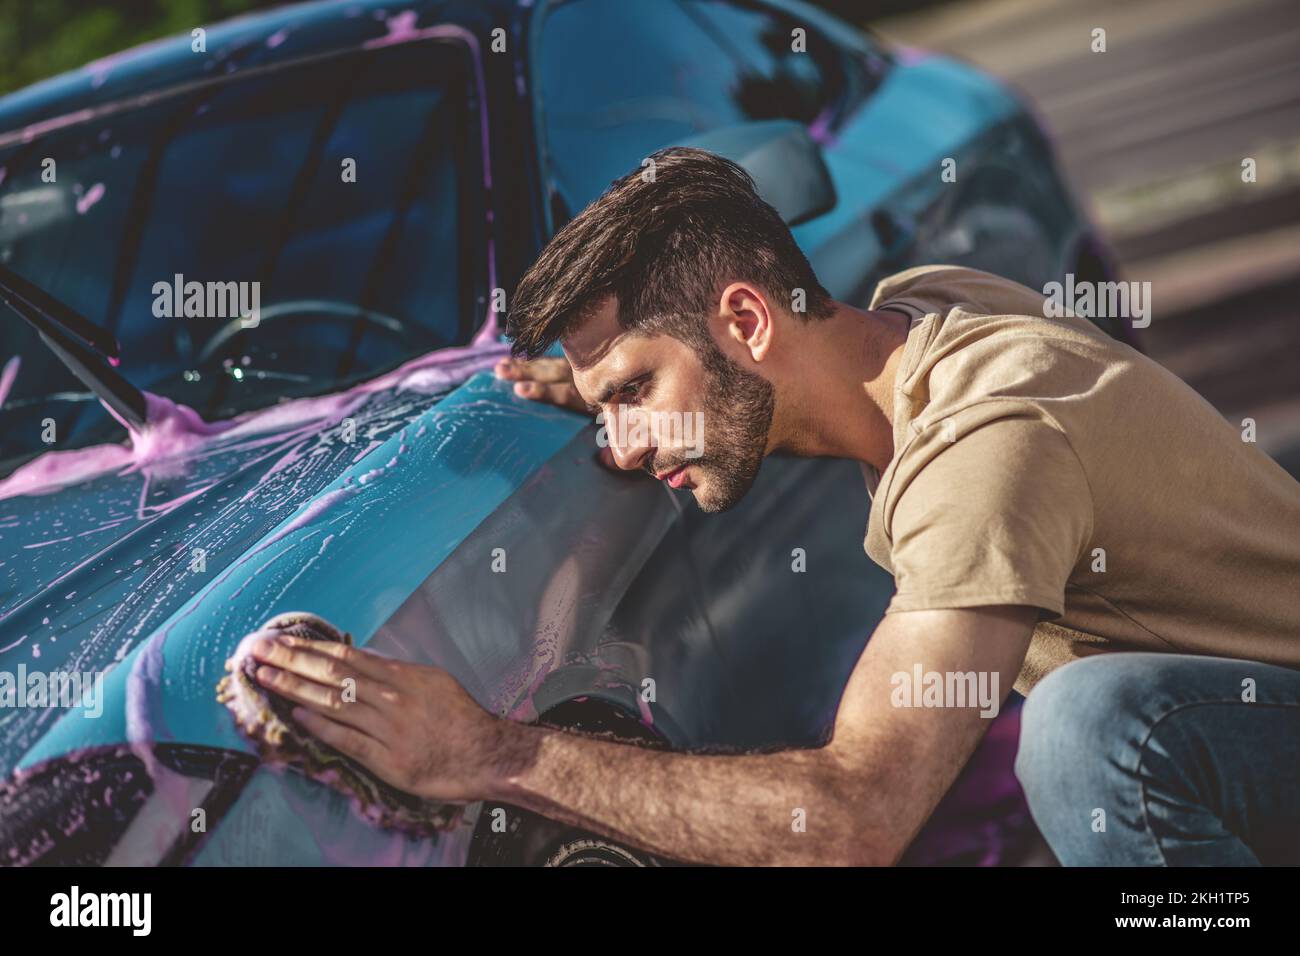 Service station worker cleaning the outside of a motor vehicle Stock Photo